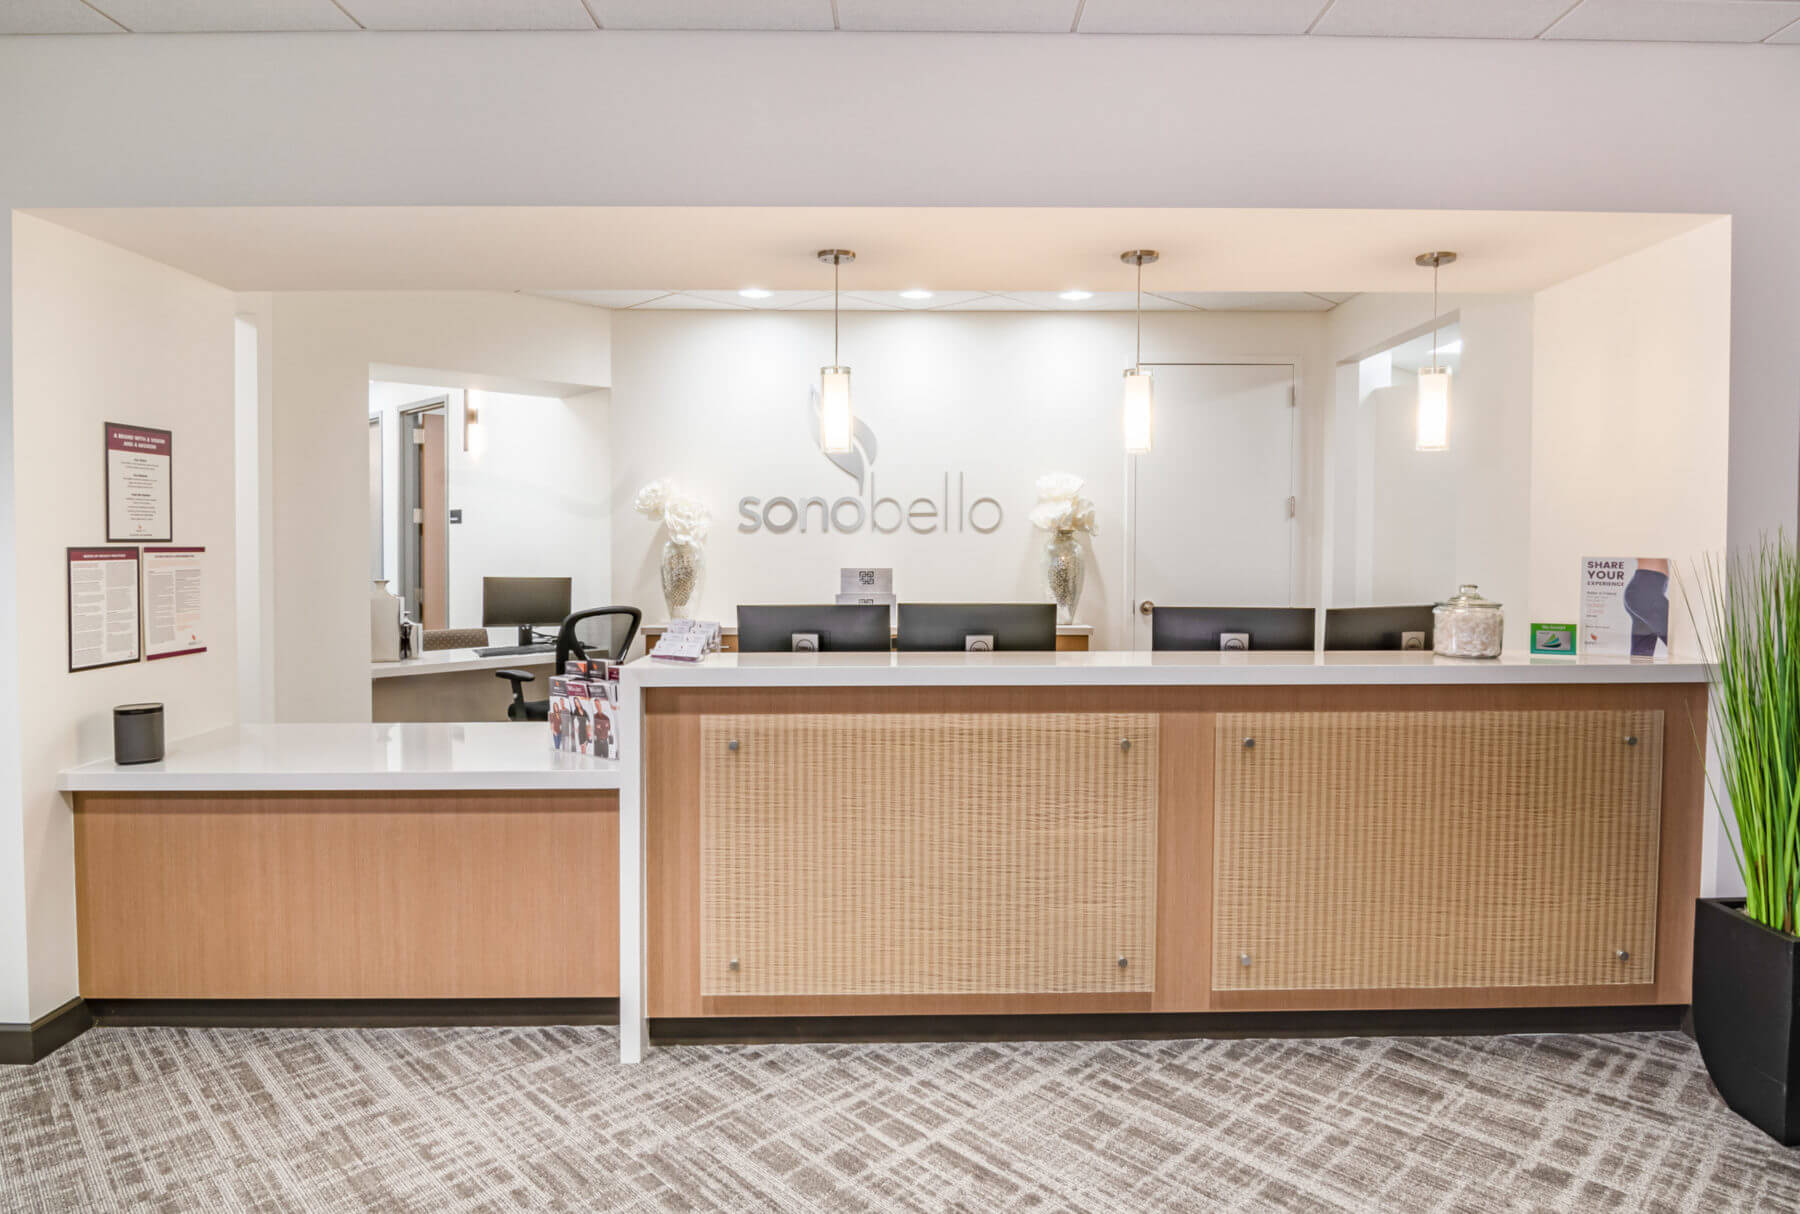 The front welcome desk for liposuction and body contouring patients in our Sono Bello Raleigh, NC location.